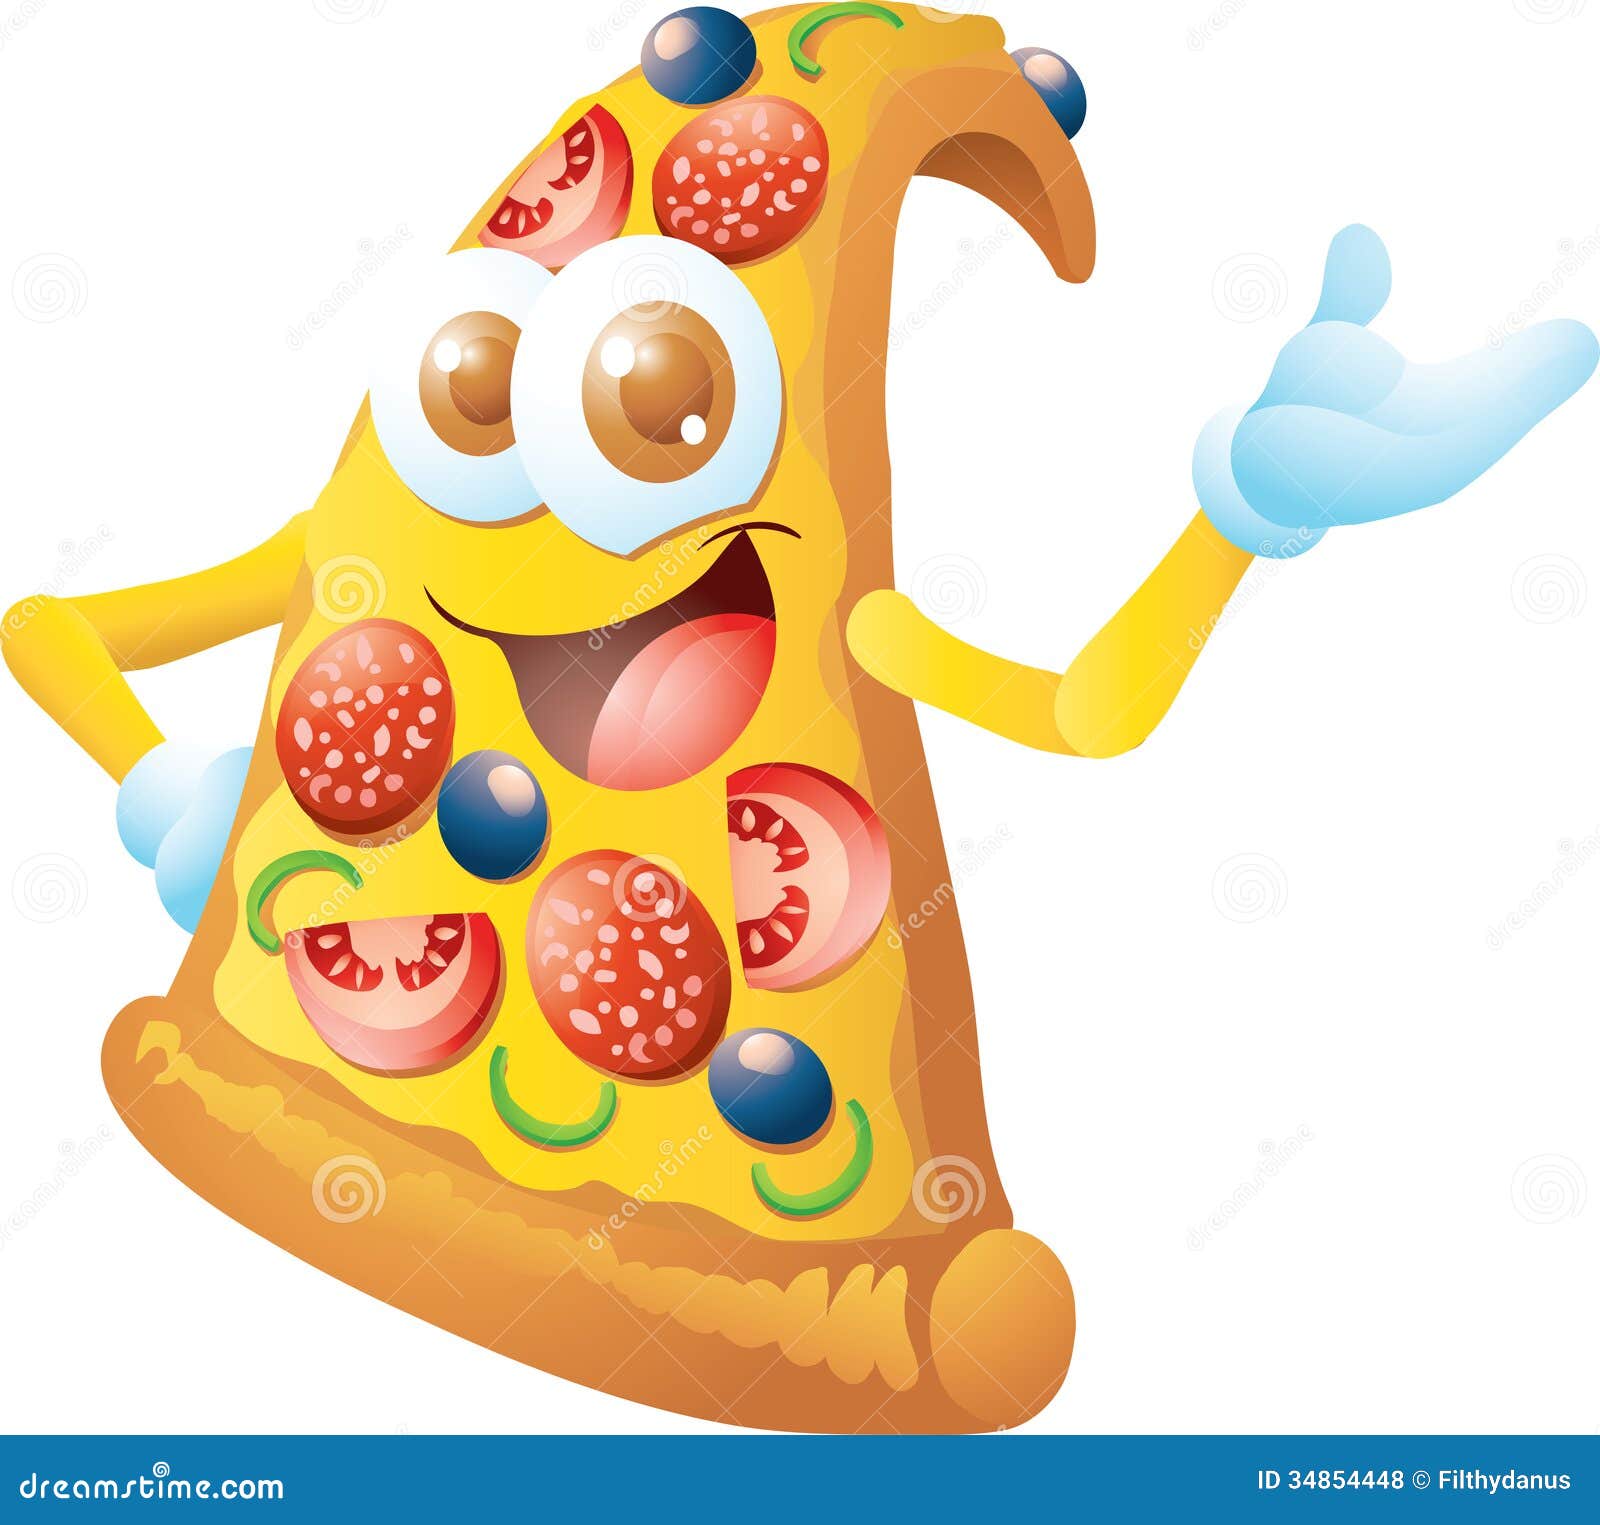 Pizza Toppings Clip Art Stock Illustrations – 102 Pizza Toppings Clip Art  Stock Illustrations, Vectors & Clipart - Dreamstime